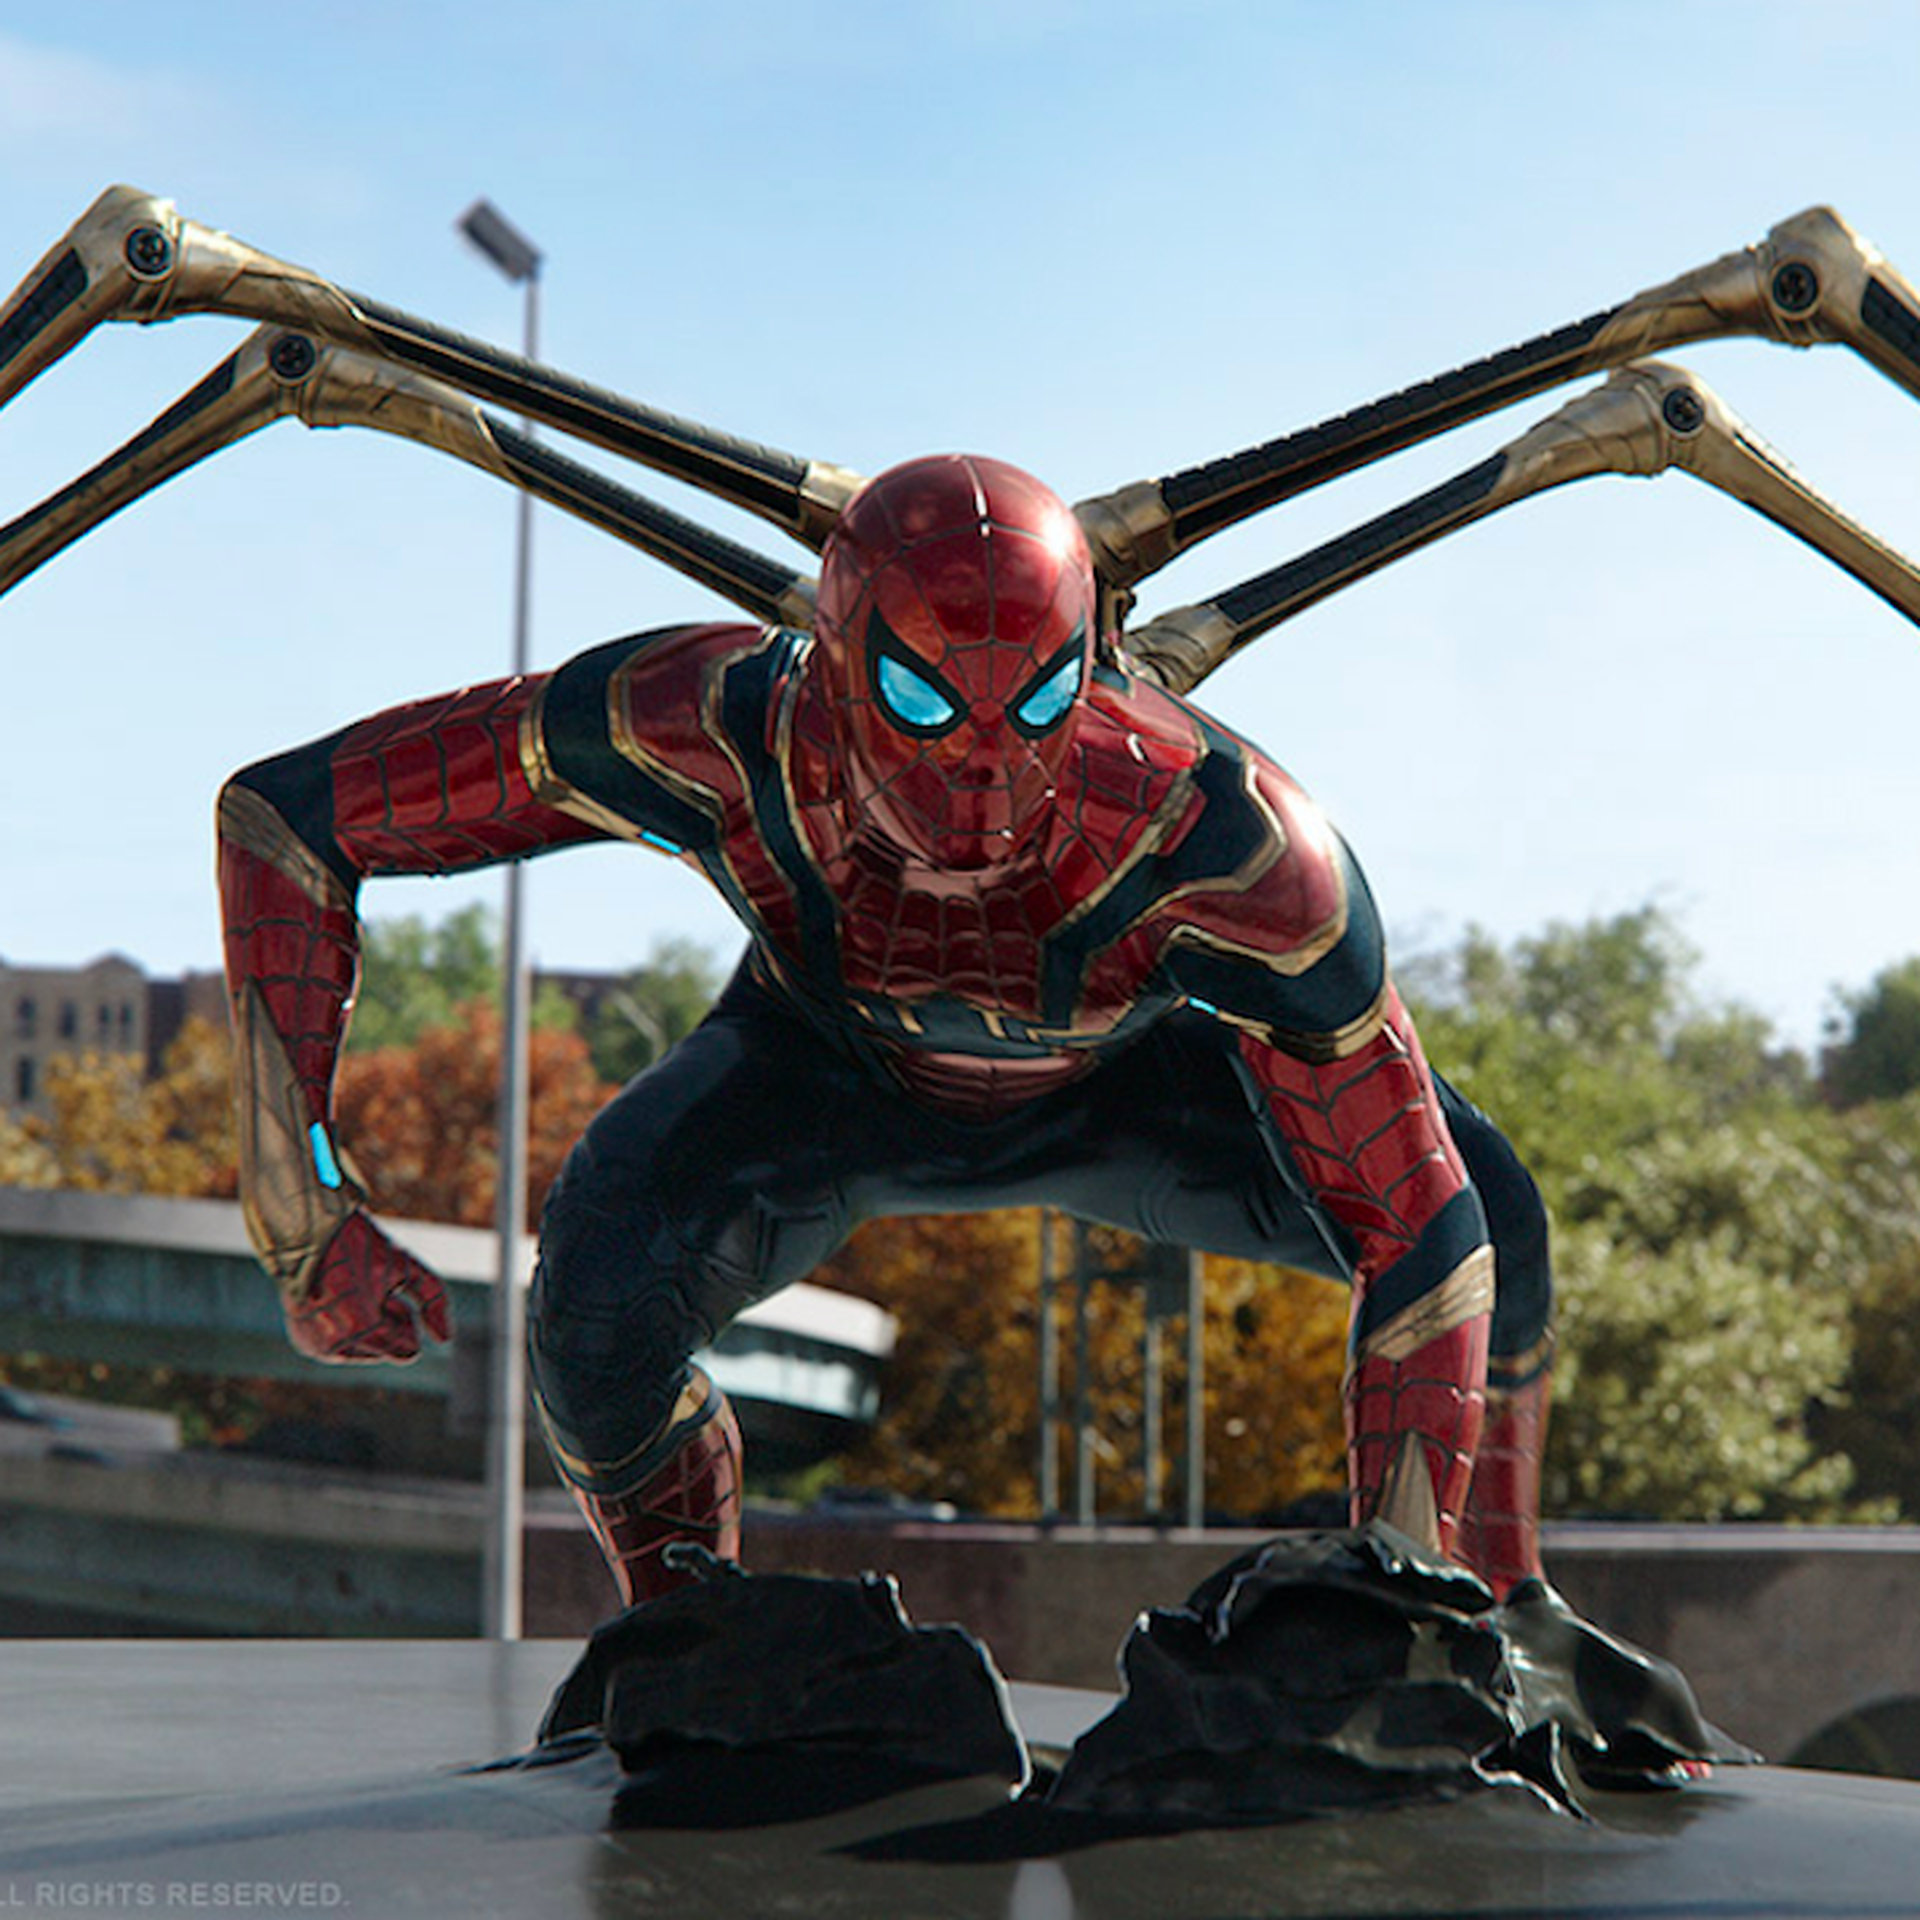 Spider-Man crushes pandemic box office record with $260M open